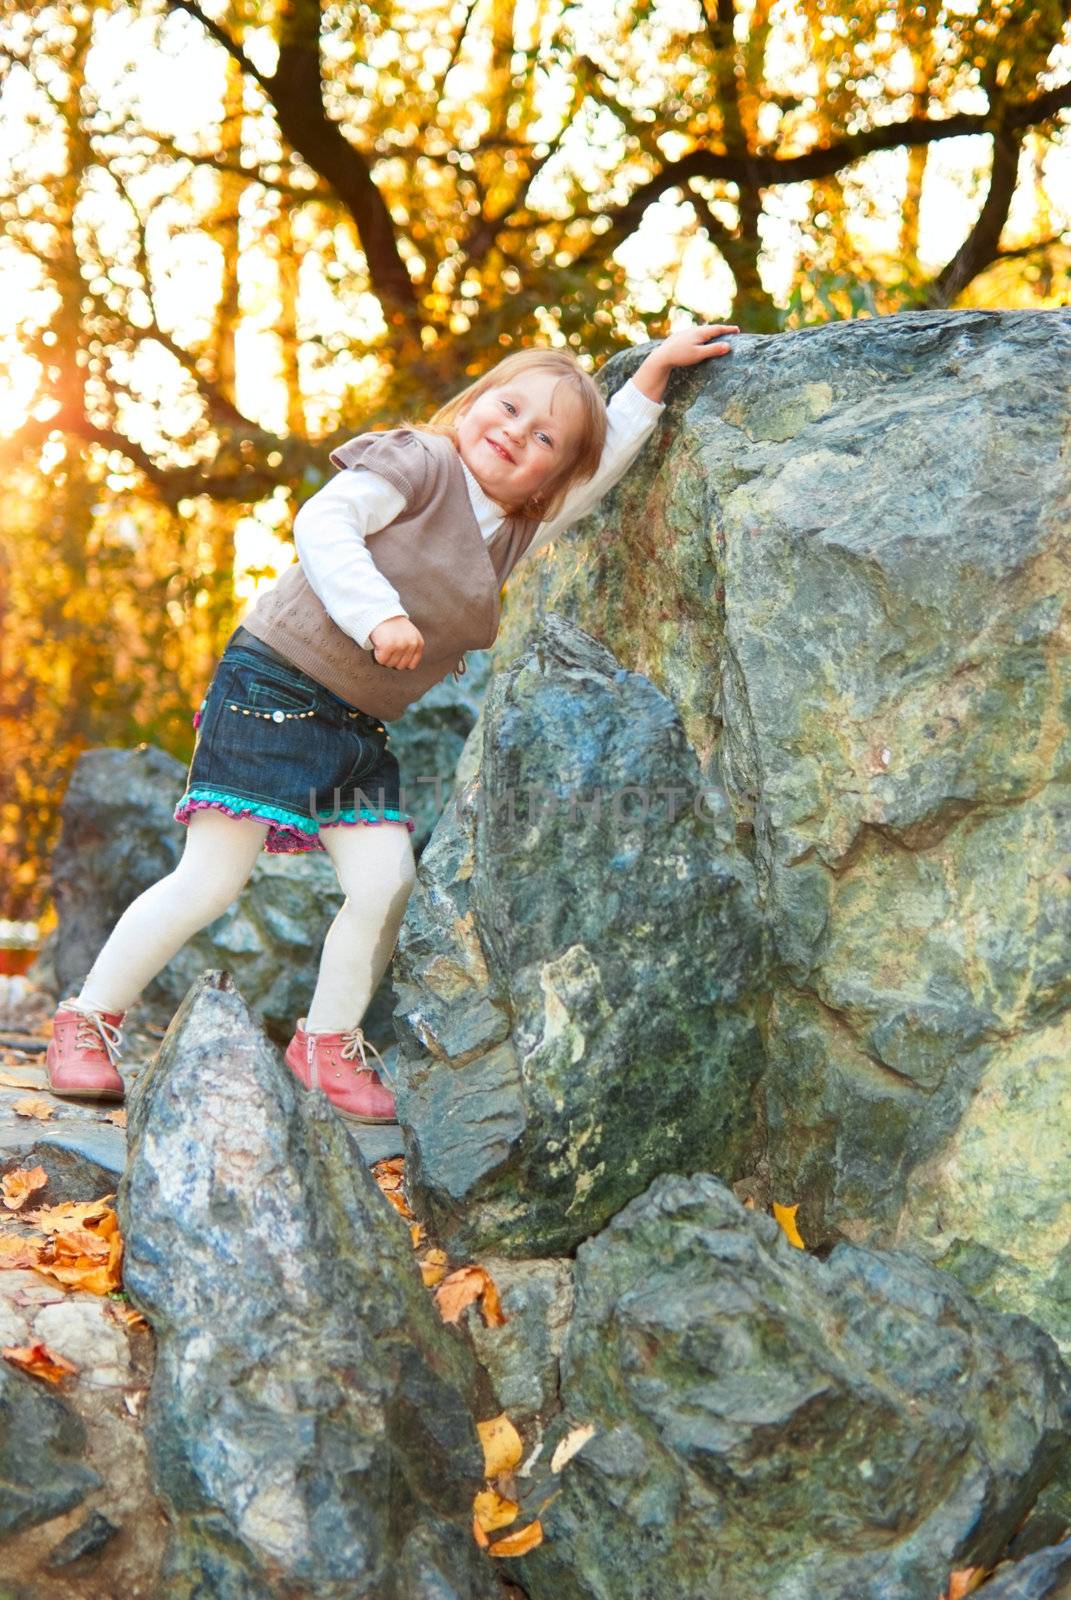 Small girl (3 years old) with smile is touching big rock. Photo has space for text